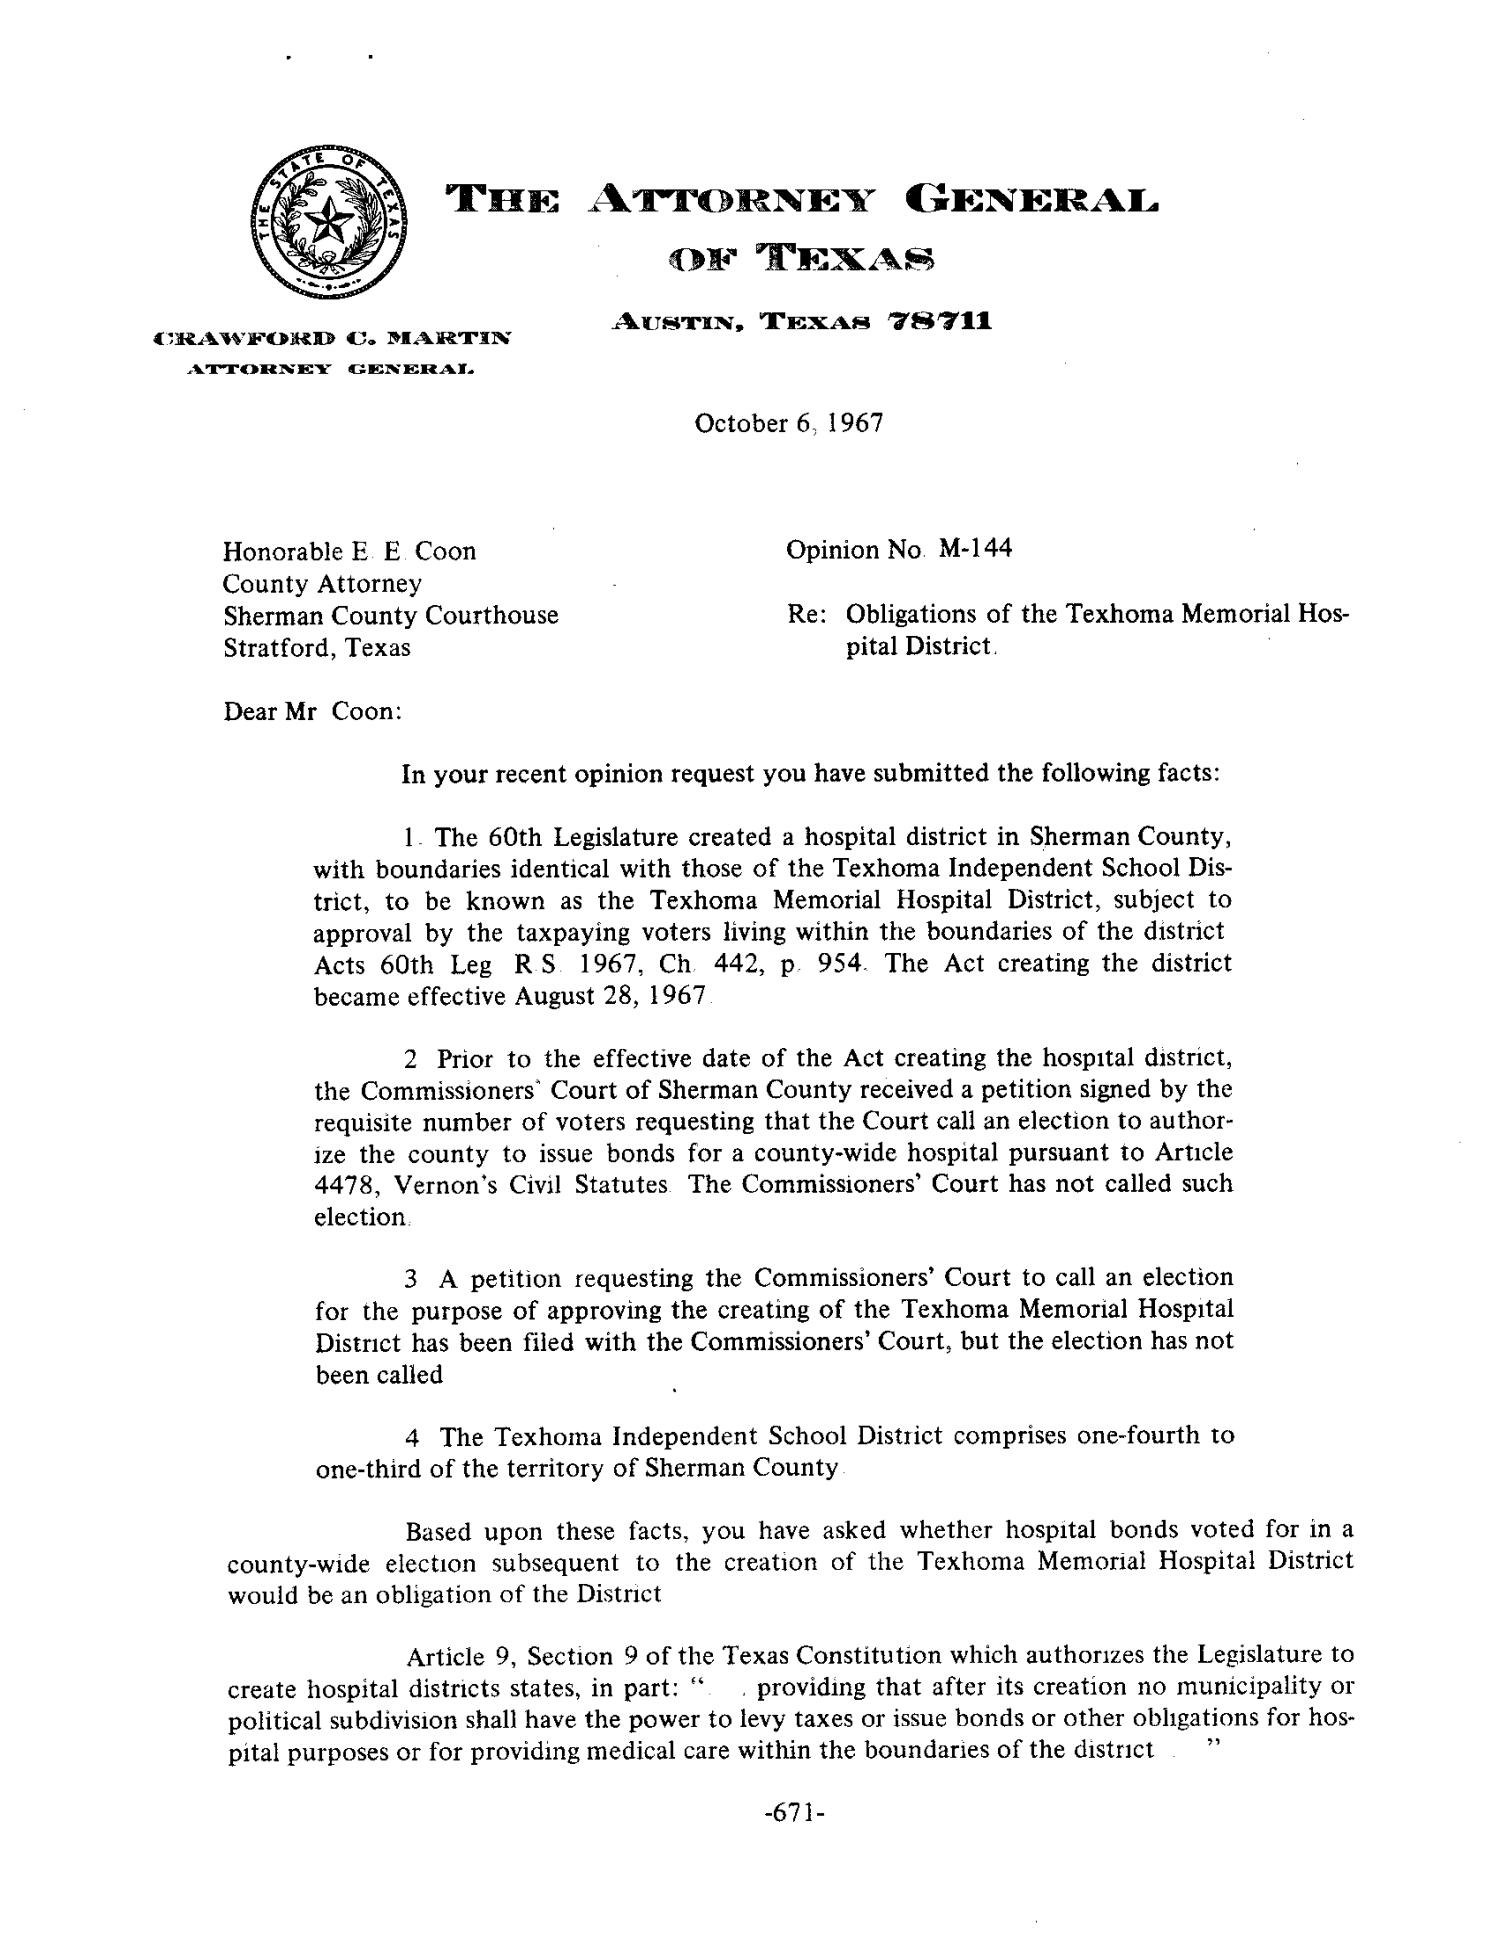 Texas Attorney General Opinion: M-144
                                                
                                                    [Sequence #]: 1 of 3
                                                